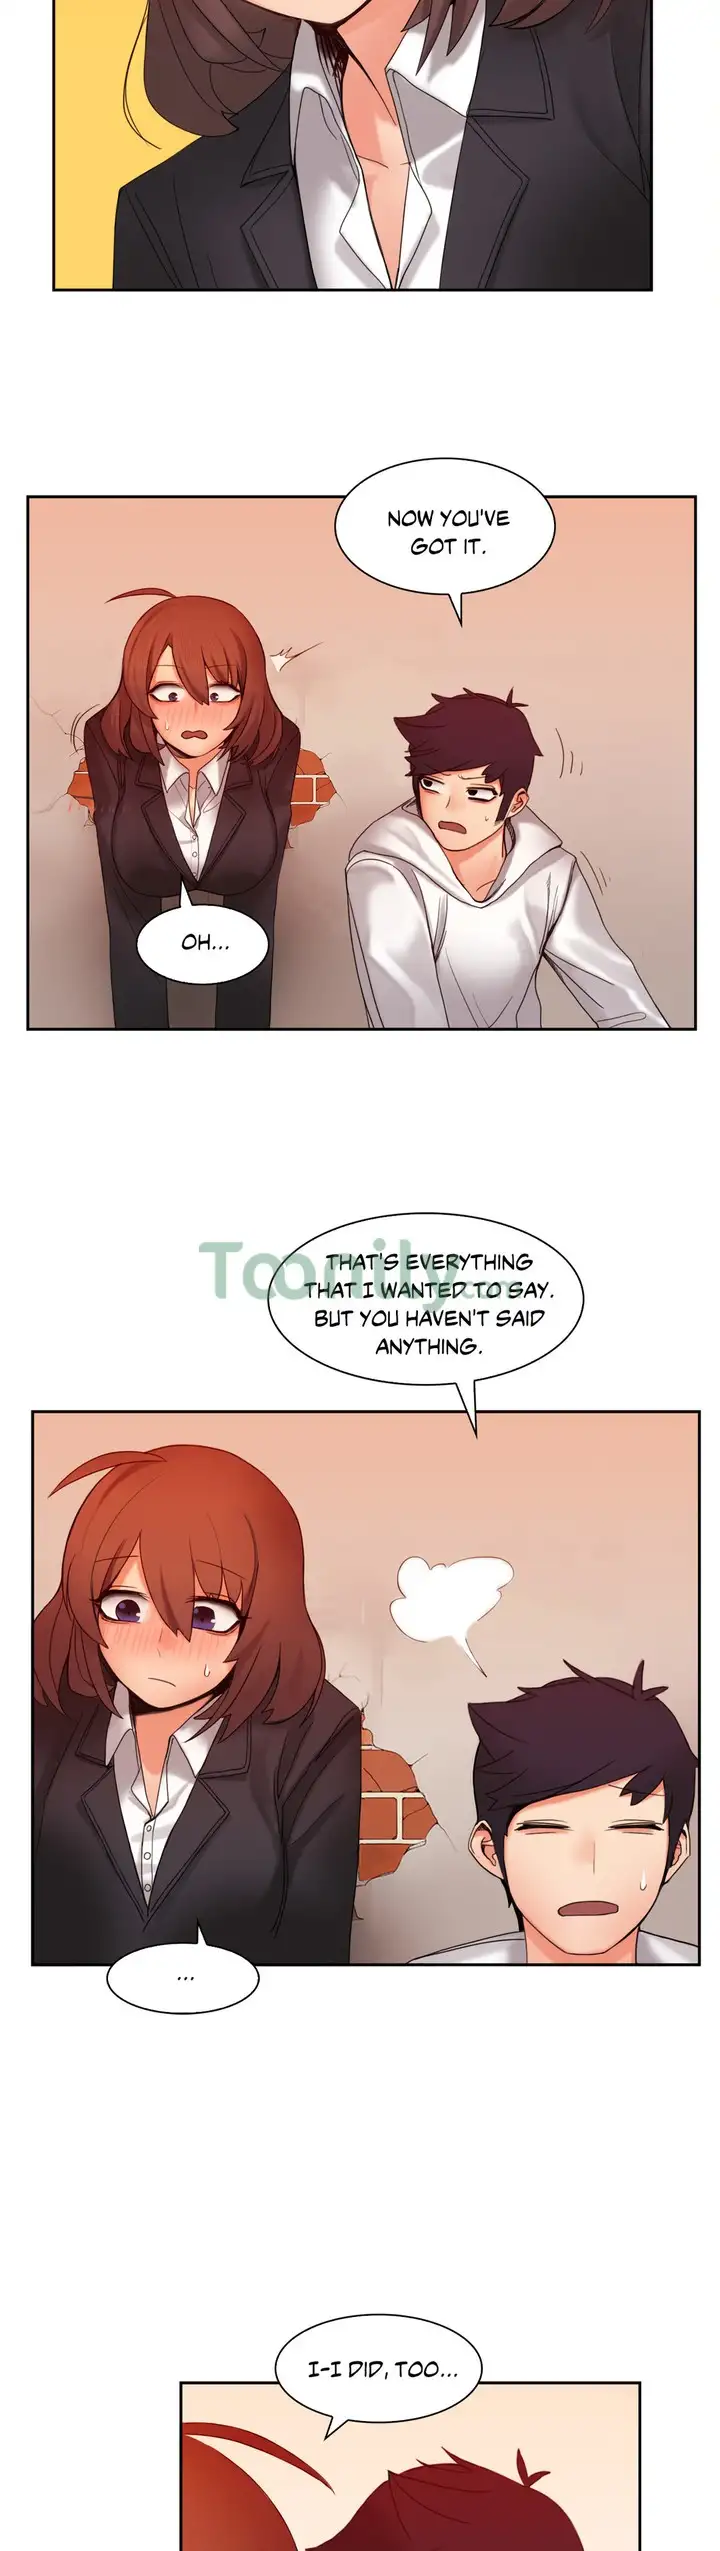 The Girl That Got Stuck in the Wall - Chapter 9 Page 18